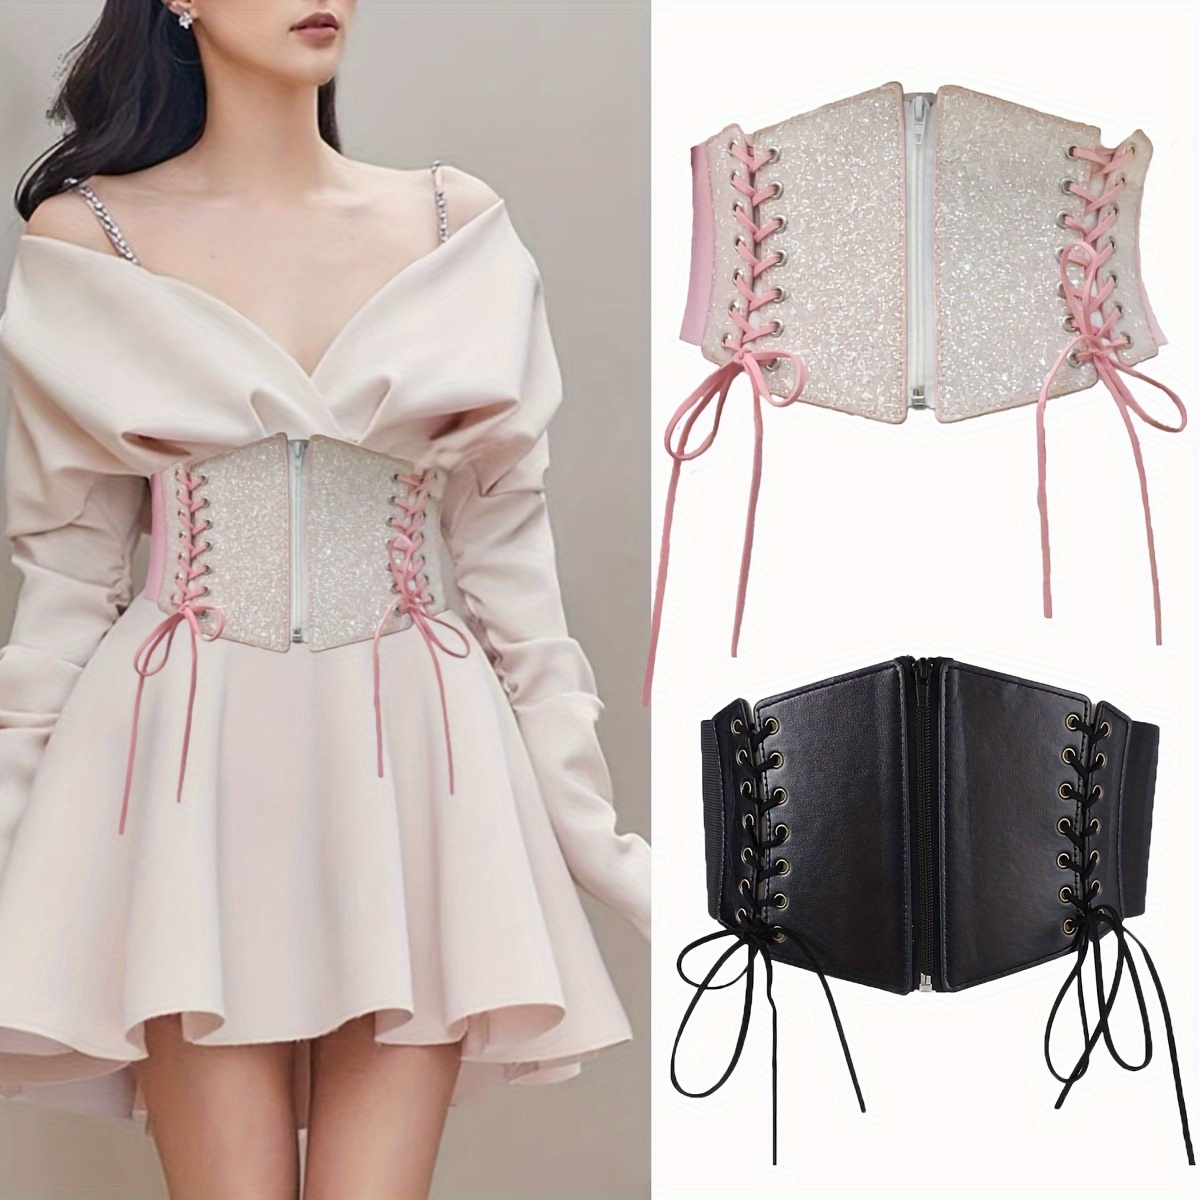 Steampunk Vintage Corset Belt For Women Stretchy Waist Band With Super Wide  Cincher And Buckle Womens Clothing Cummerbund From Yujia05, $11.6